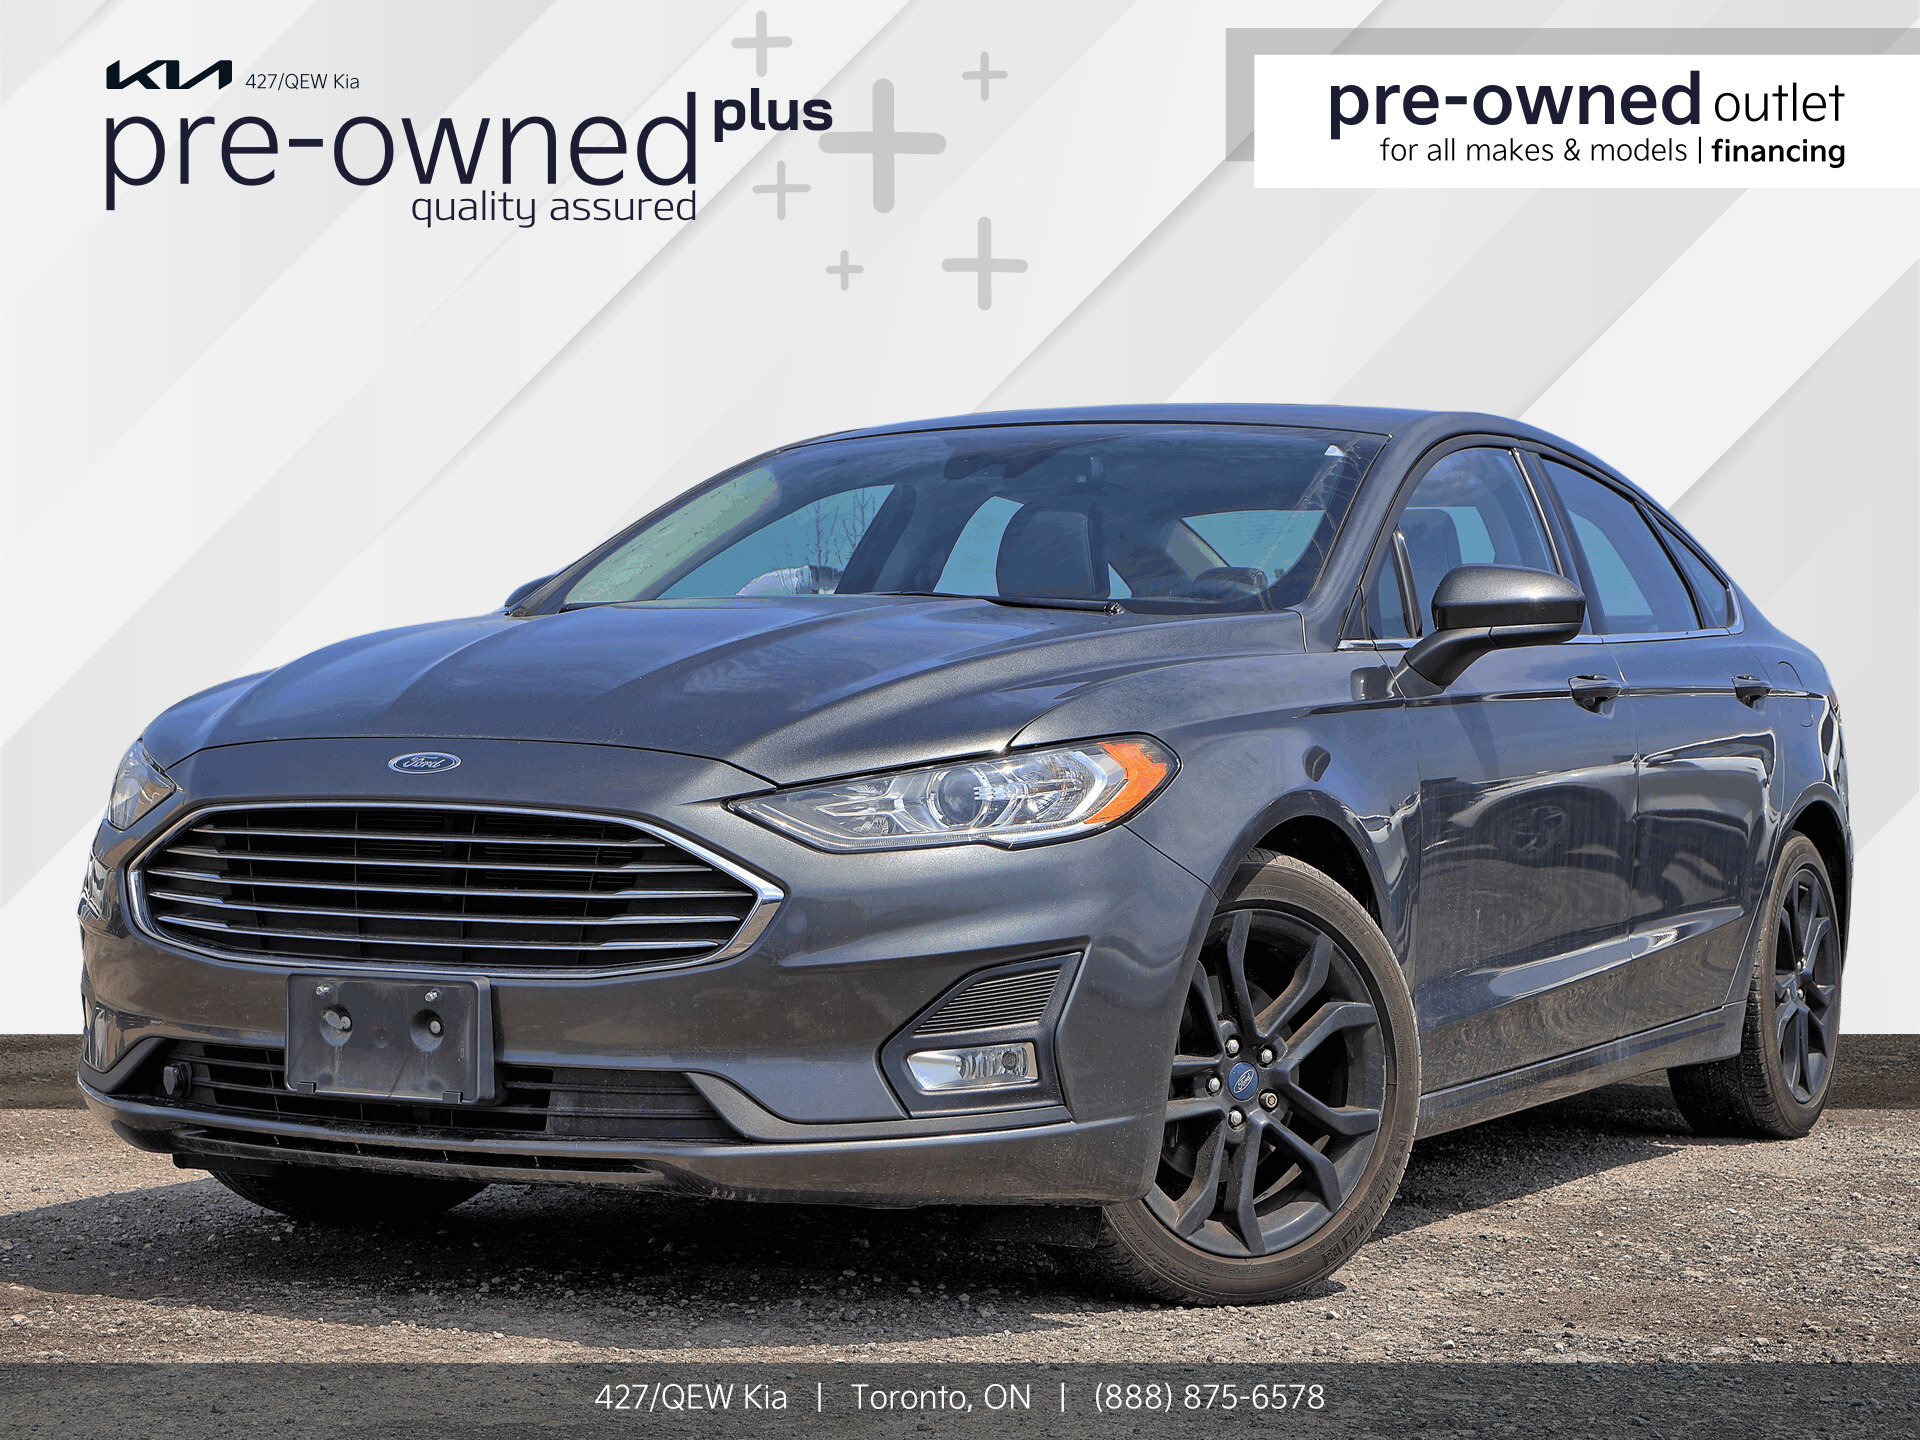 2019 Ford Fusion SE | Power Seat | Climate Ctrl | Lane Assist